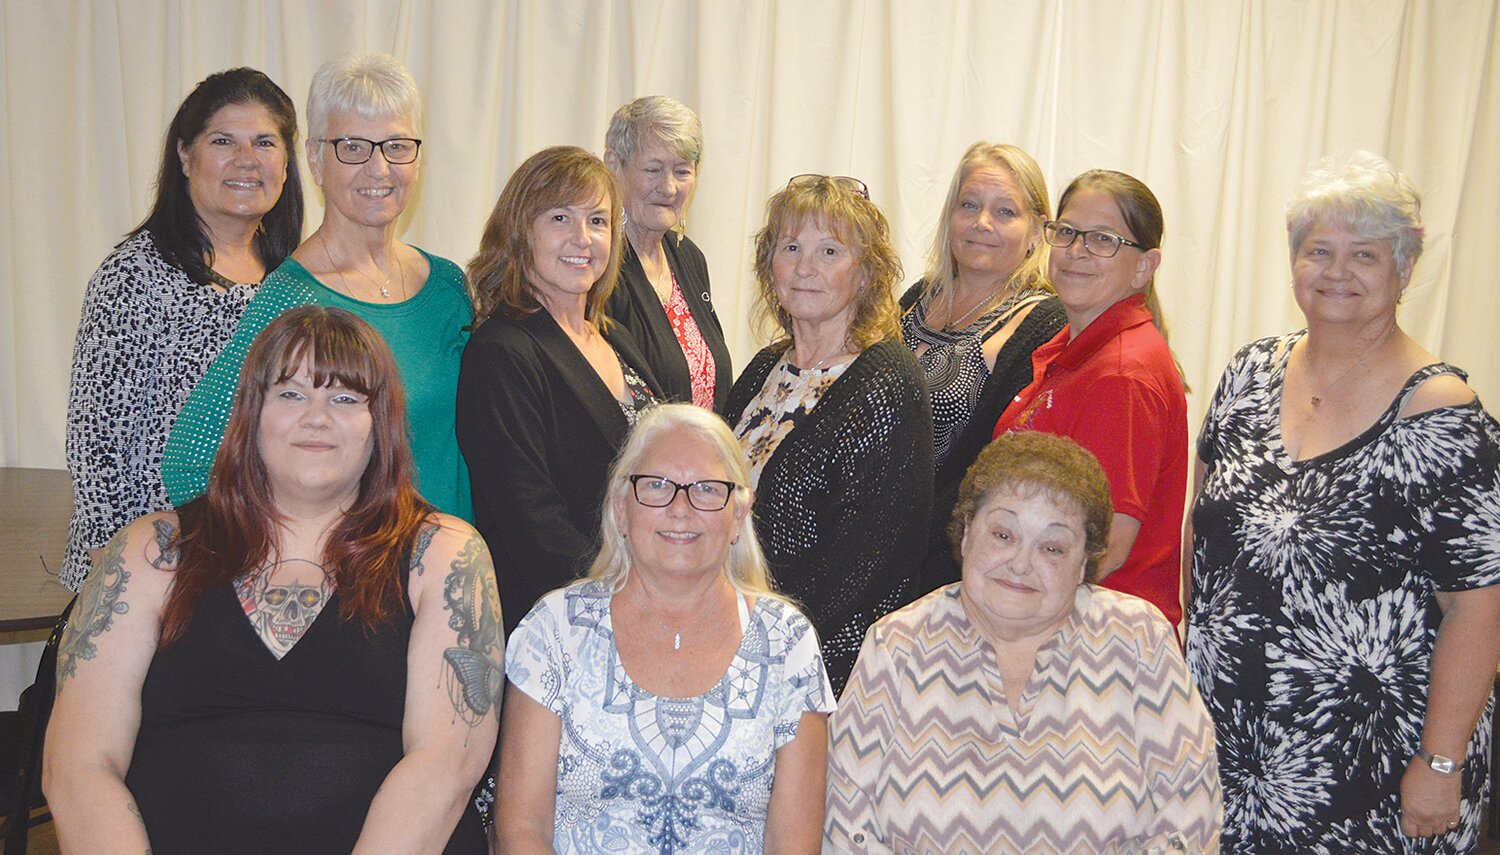 Auxiliary officers are, from left, front row, Madam President Natasha Headdy, Jr Past Madam President Linda Hudson and Trustee Linda Bell; middle row, Treasurer LuAnn Hampton, Chaplain Mary Hatch, Trustee Lisa Hieston, Madam Vice President Johnna Williams and Inside Guard Rita Wilson; and back row, Secretary Denise Hampton, Conductor Ruth Hutchens and Trustee Ressa Conkright.